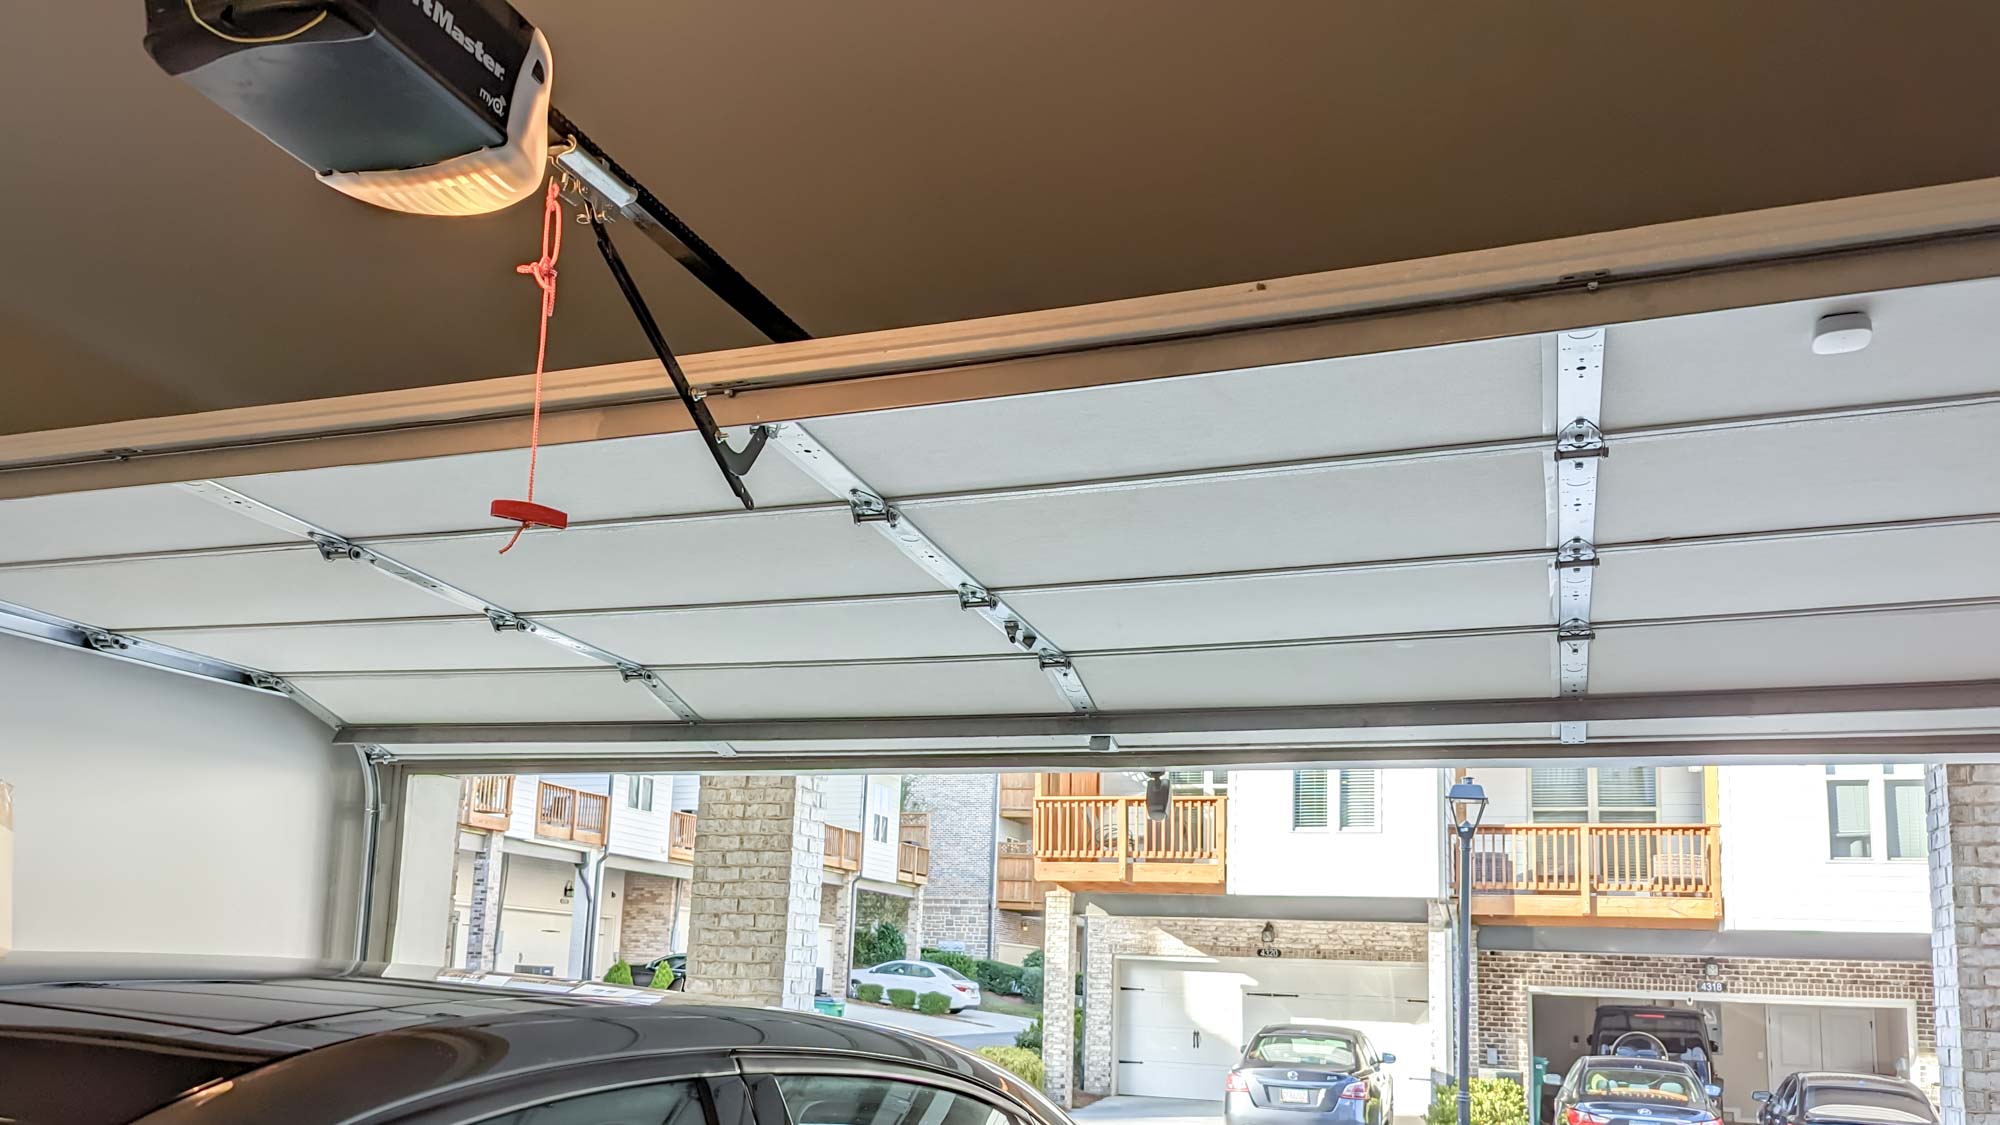 Image of an open garage door with a car parked inside